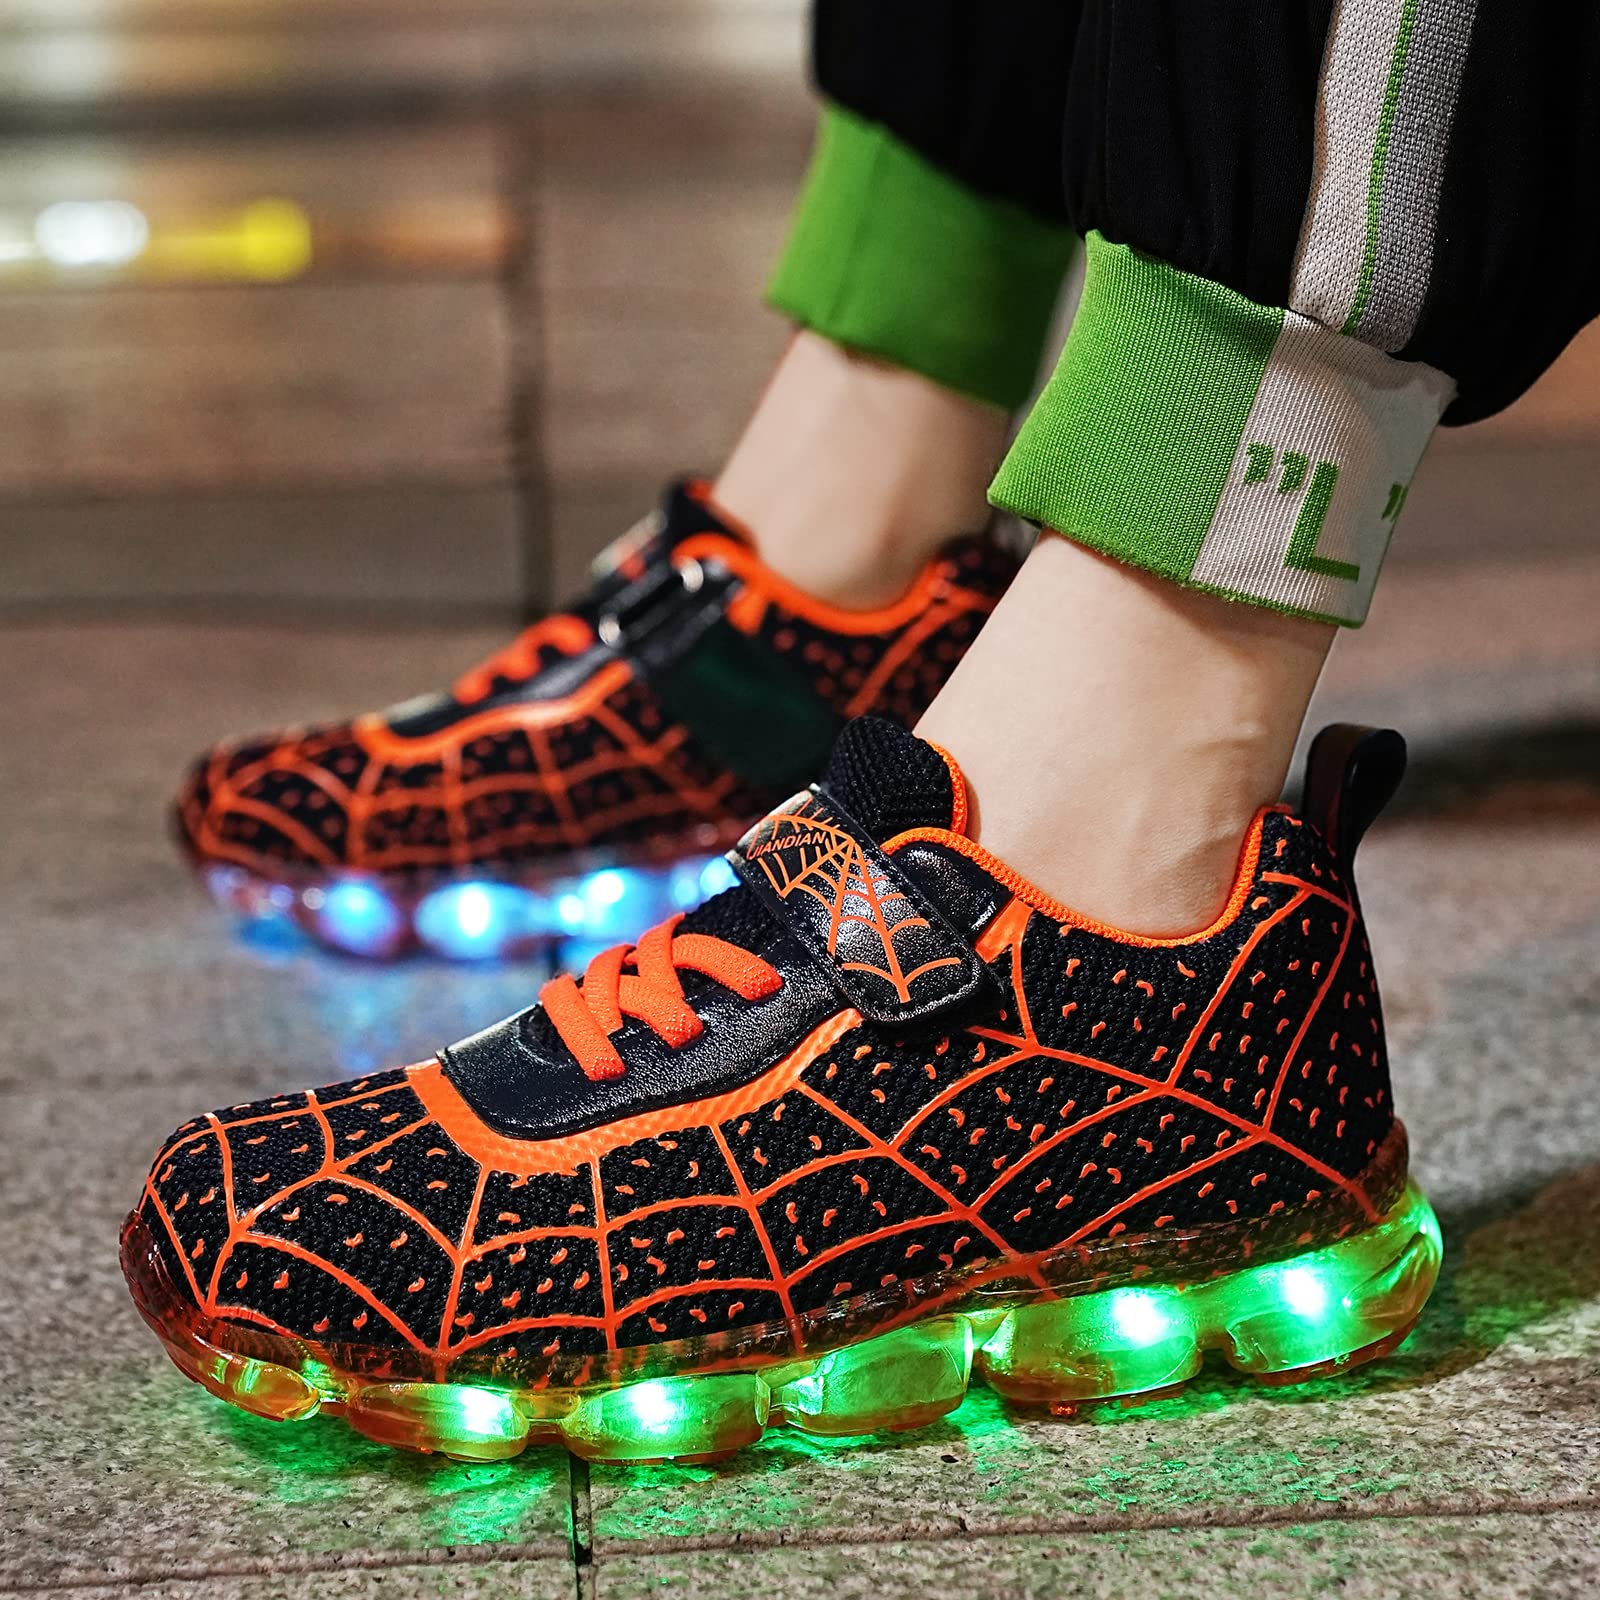 YUNICUS Kids Light Up Shoes Led Flash Sneakers with Spider Upper USB Charge for Boys Girls Toddles Best Gift for Birthday Thanksgiving Christmas Day